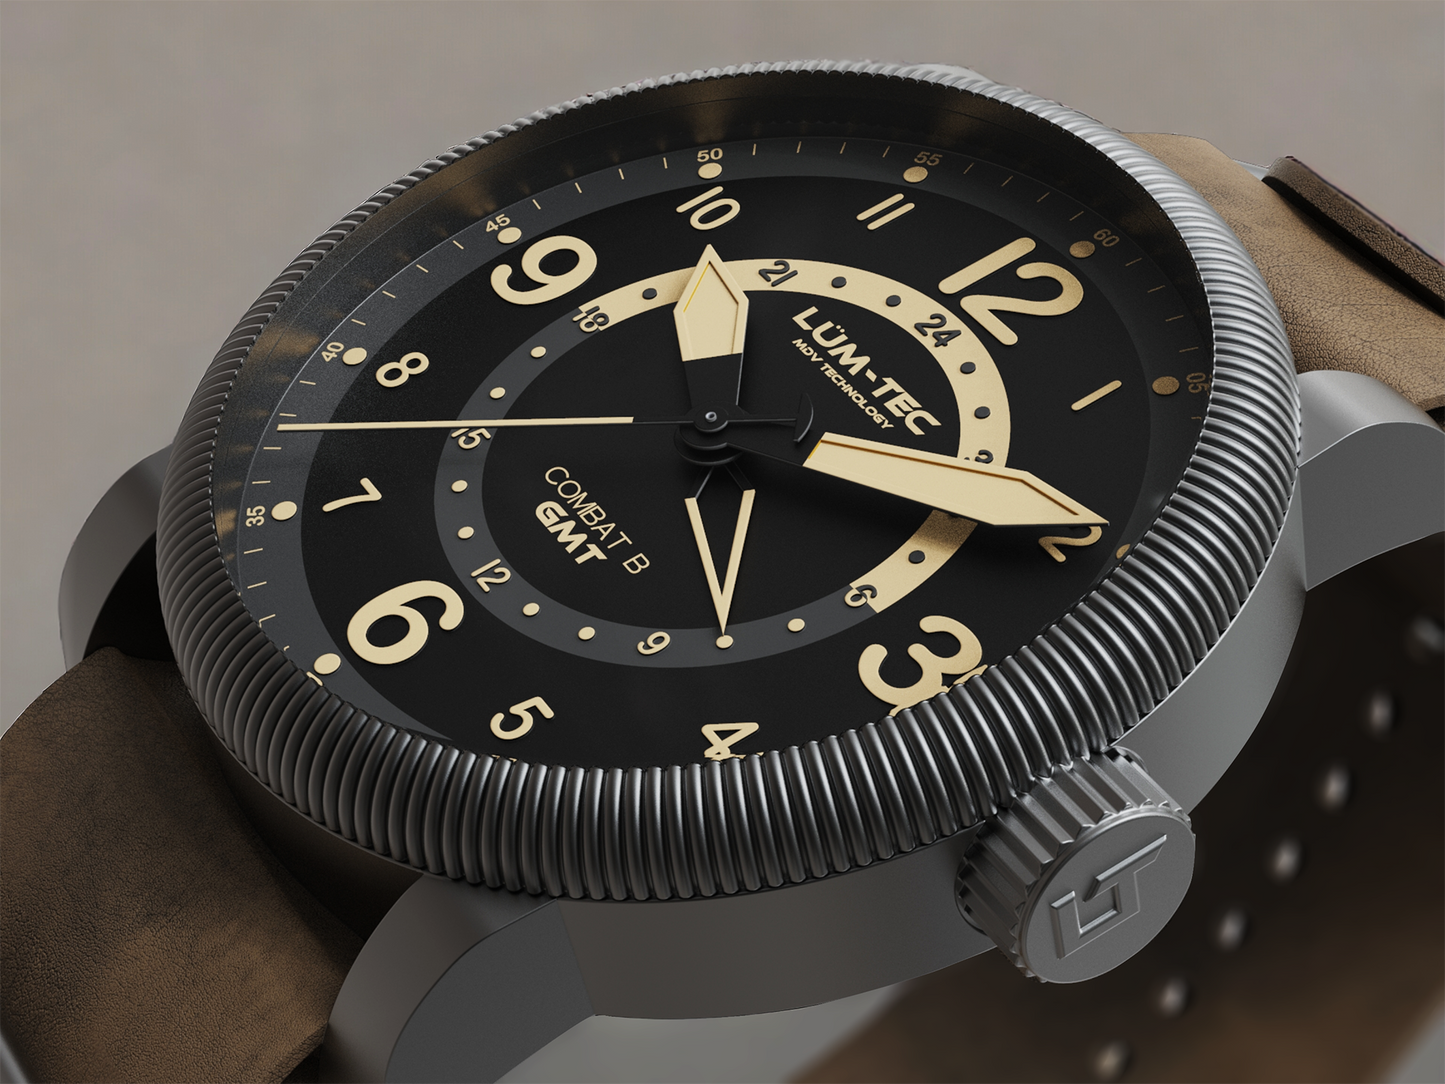 Combat B58 GMT Automatic Pre-Order